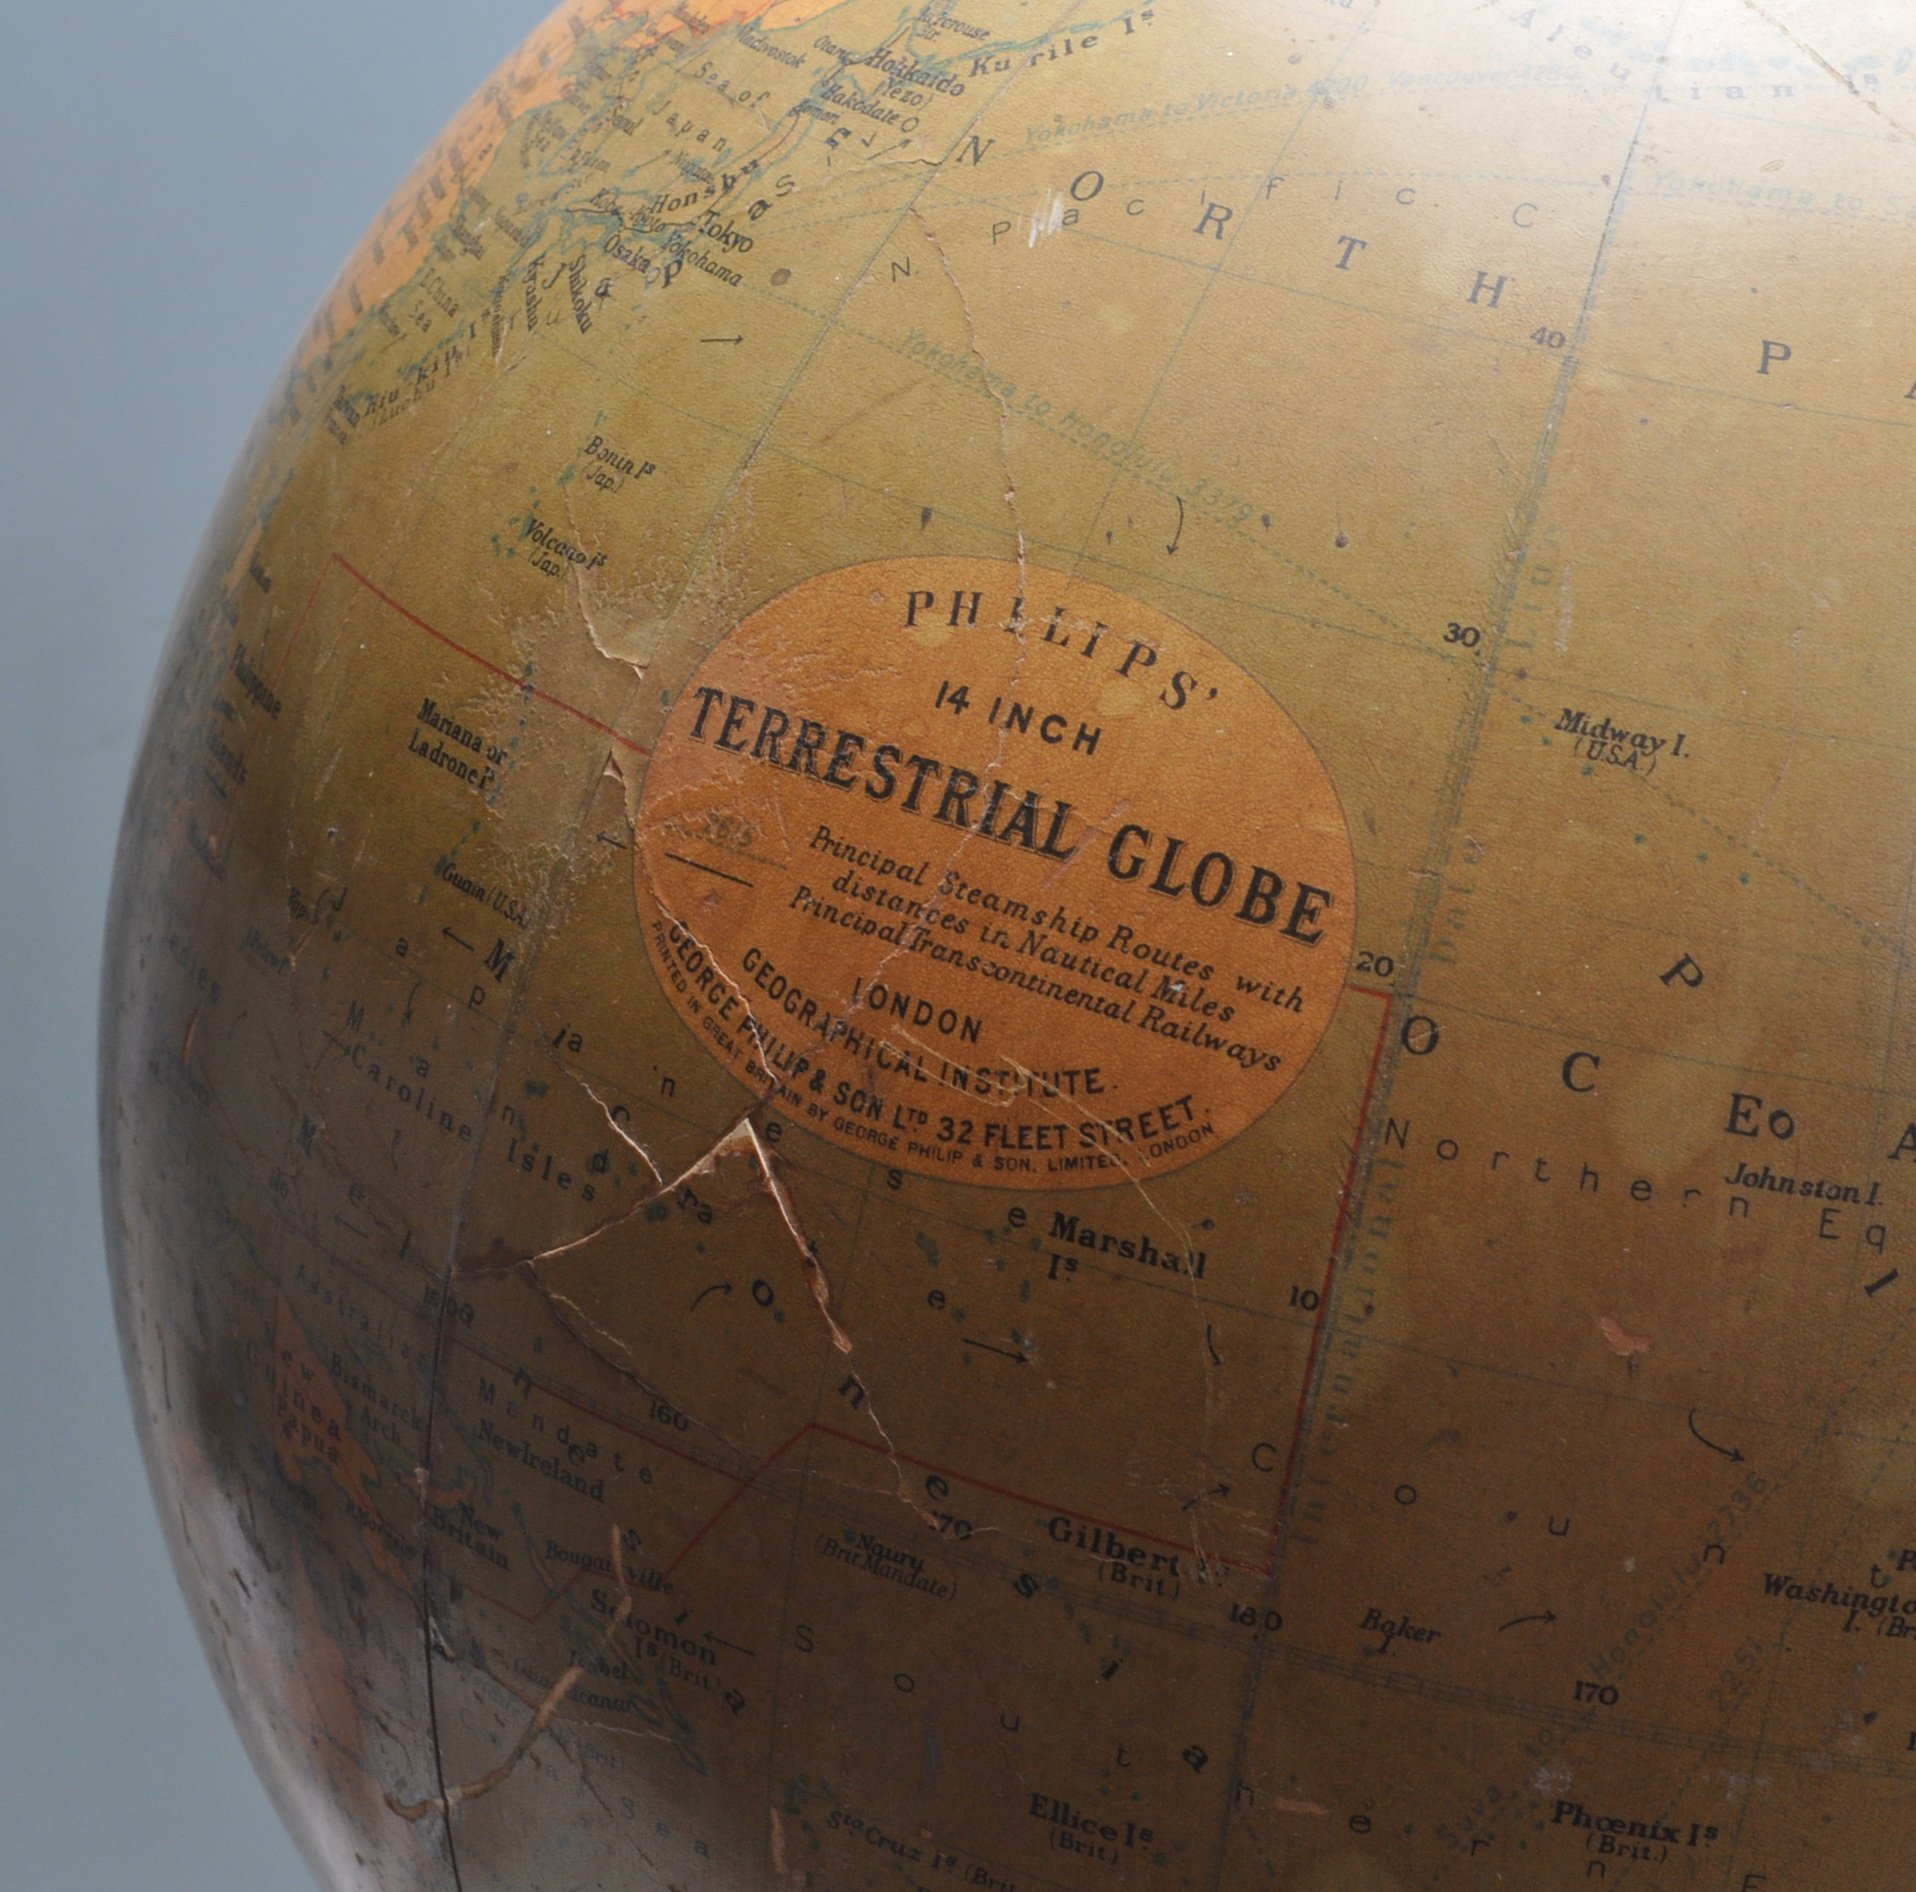 LARGE EARLY 20TH CENTURY 1930S PHILIPS TERRESTRIAL GLOBE - Image 2 of 7